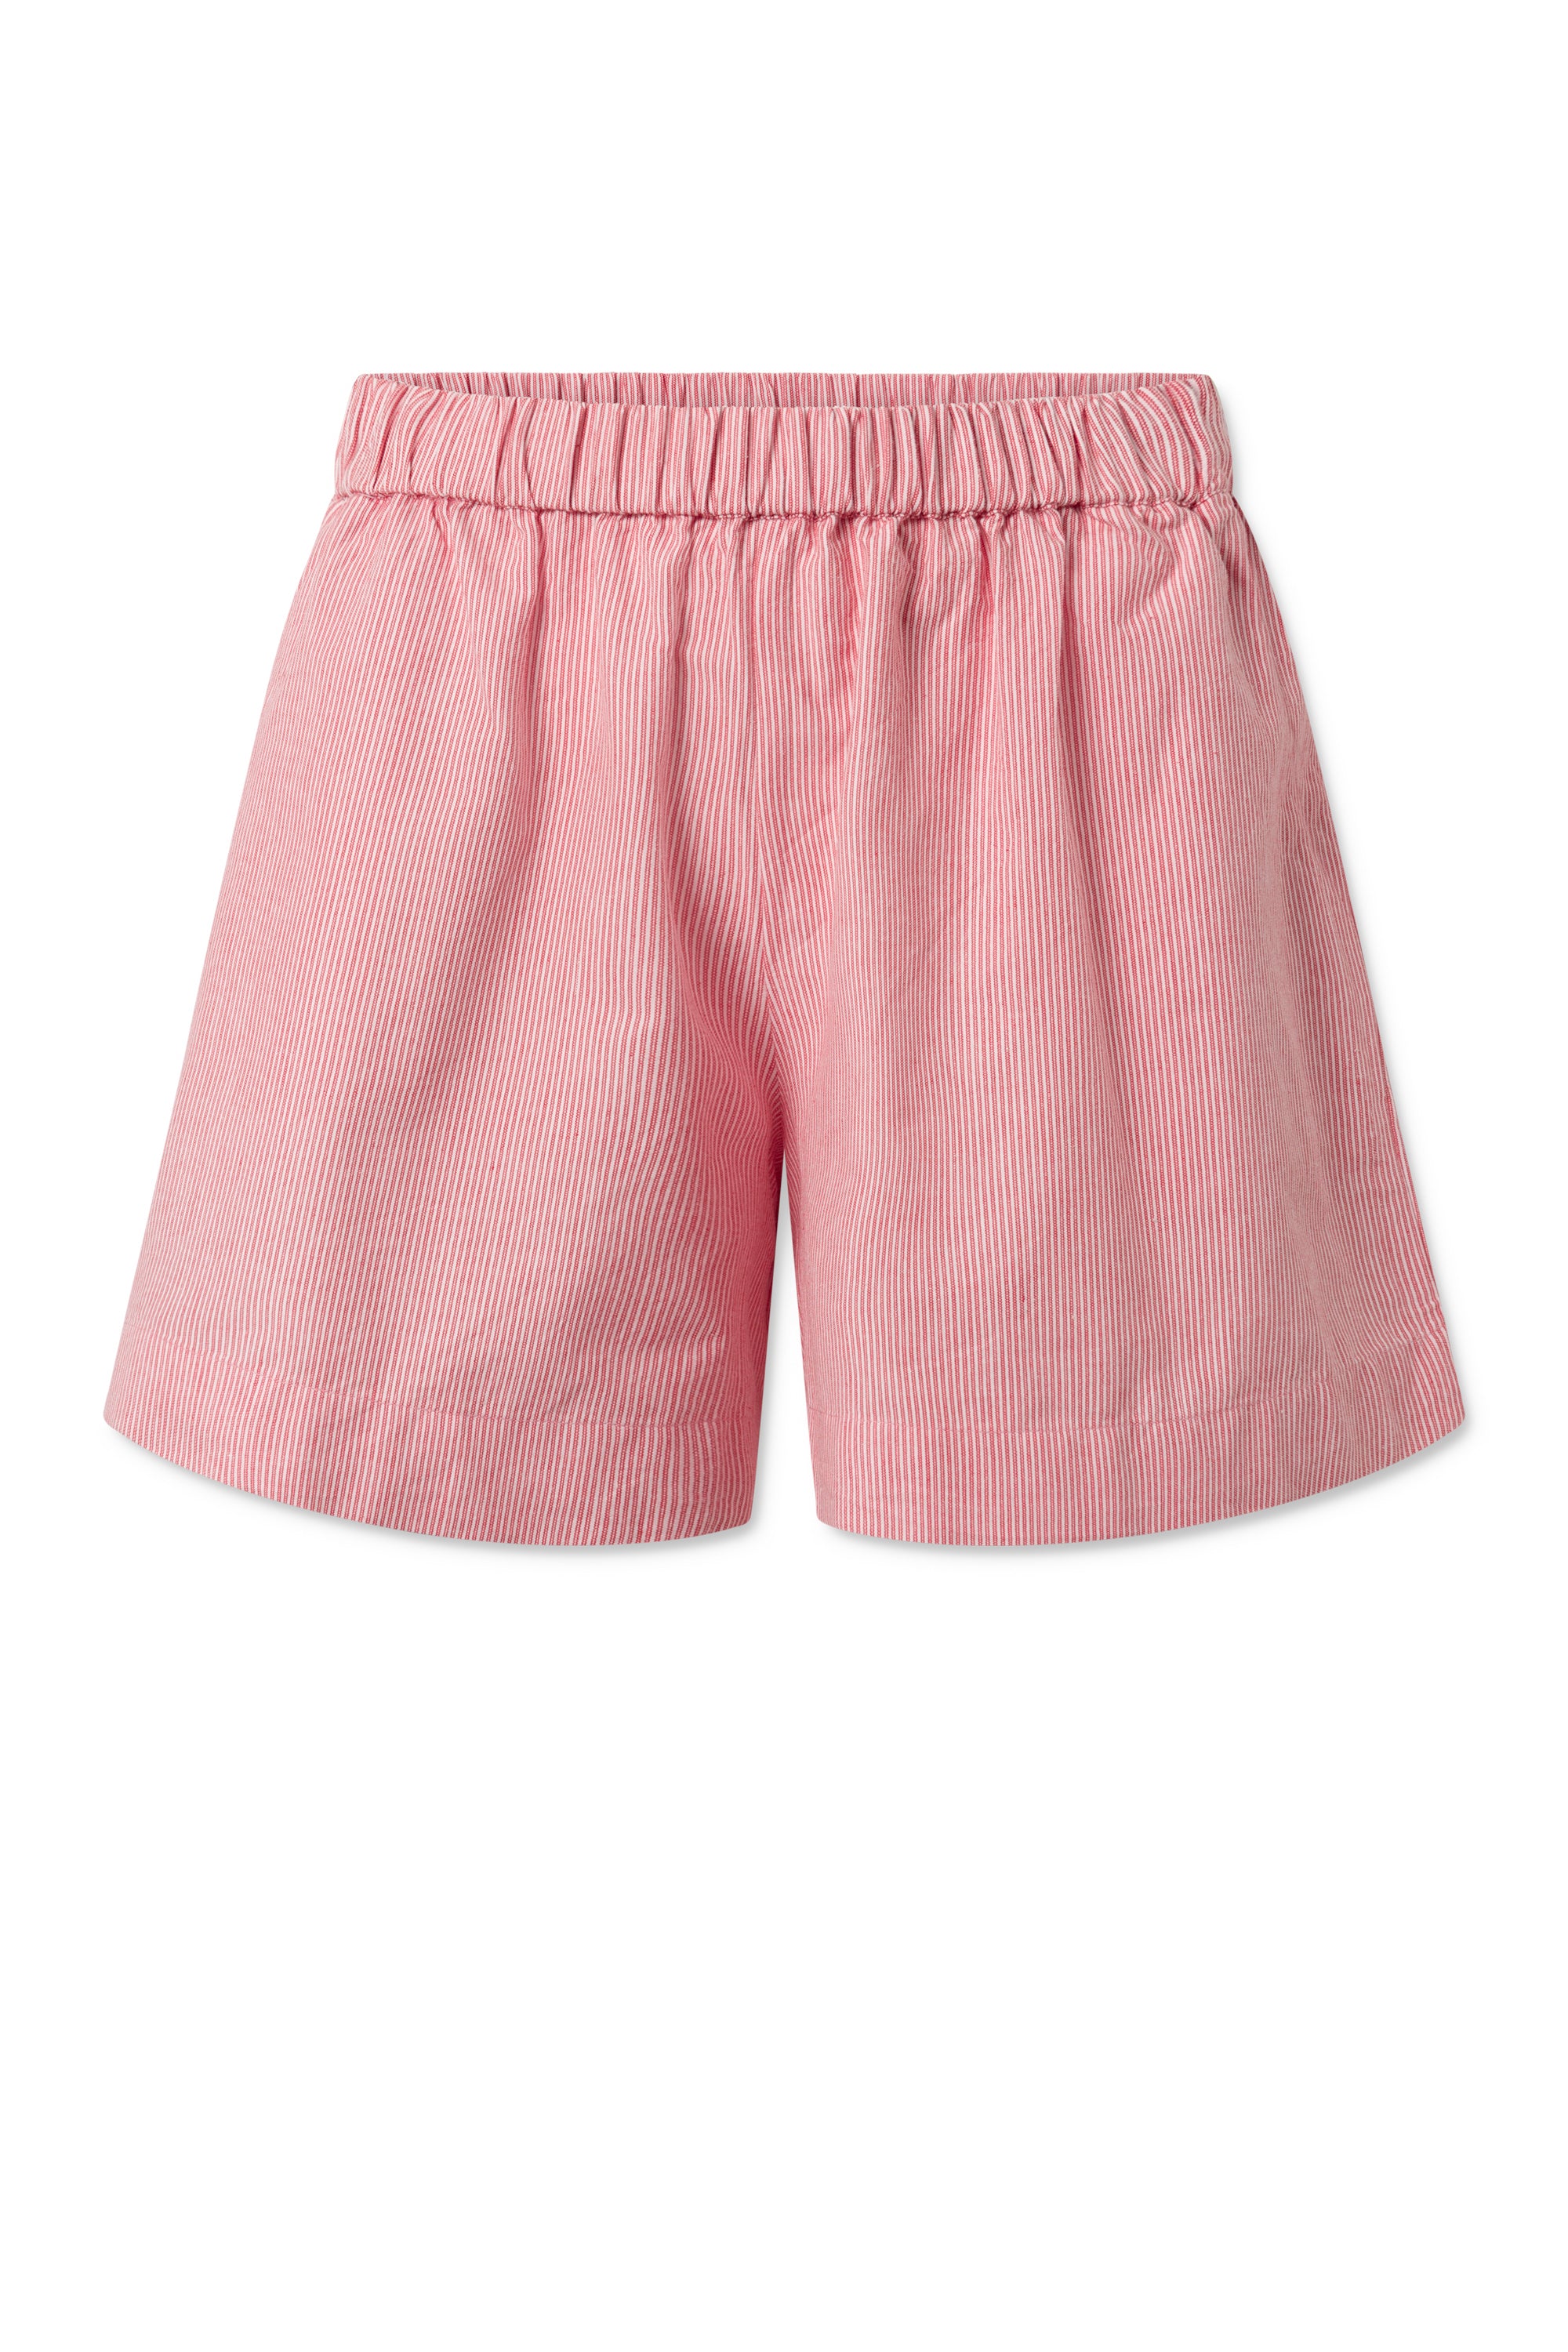 nué notes Juliano Shorts SHORTS 381 Red Stripe